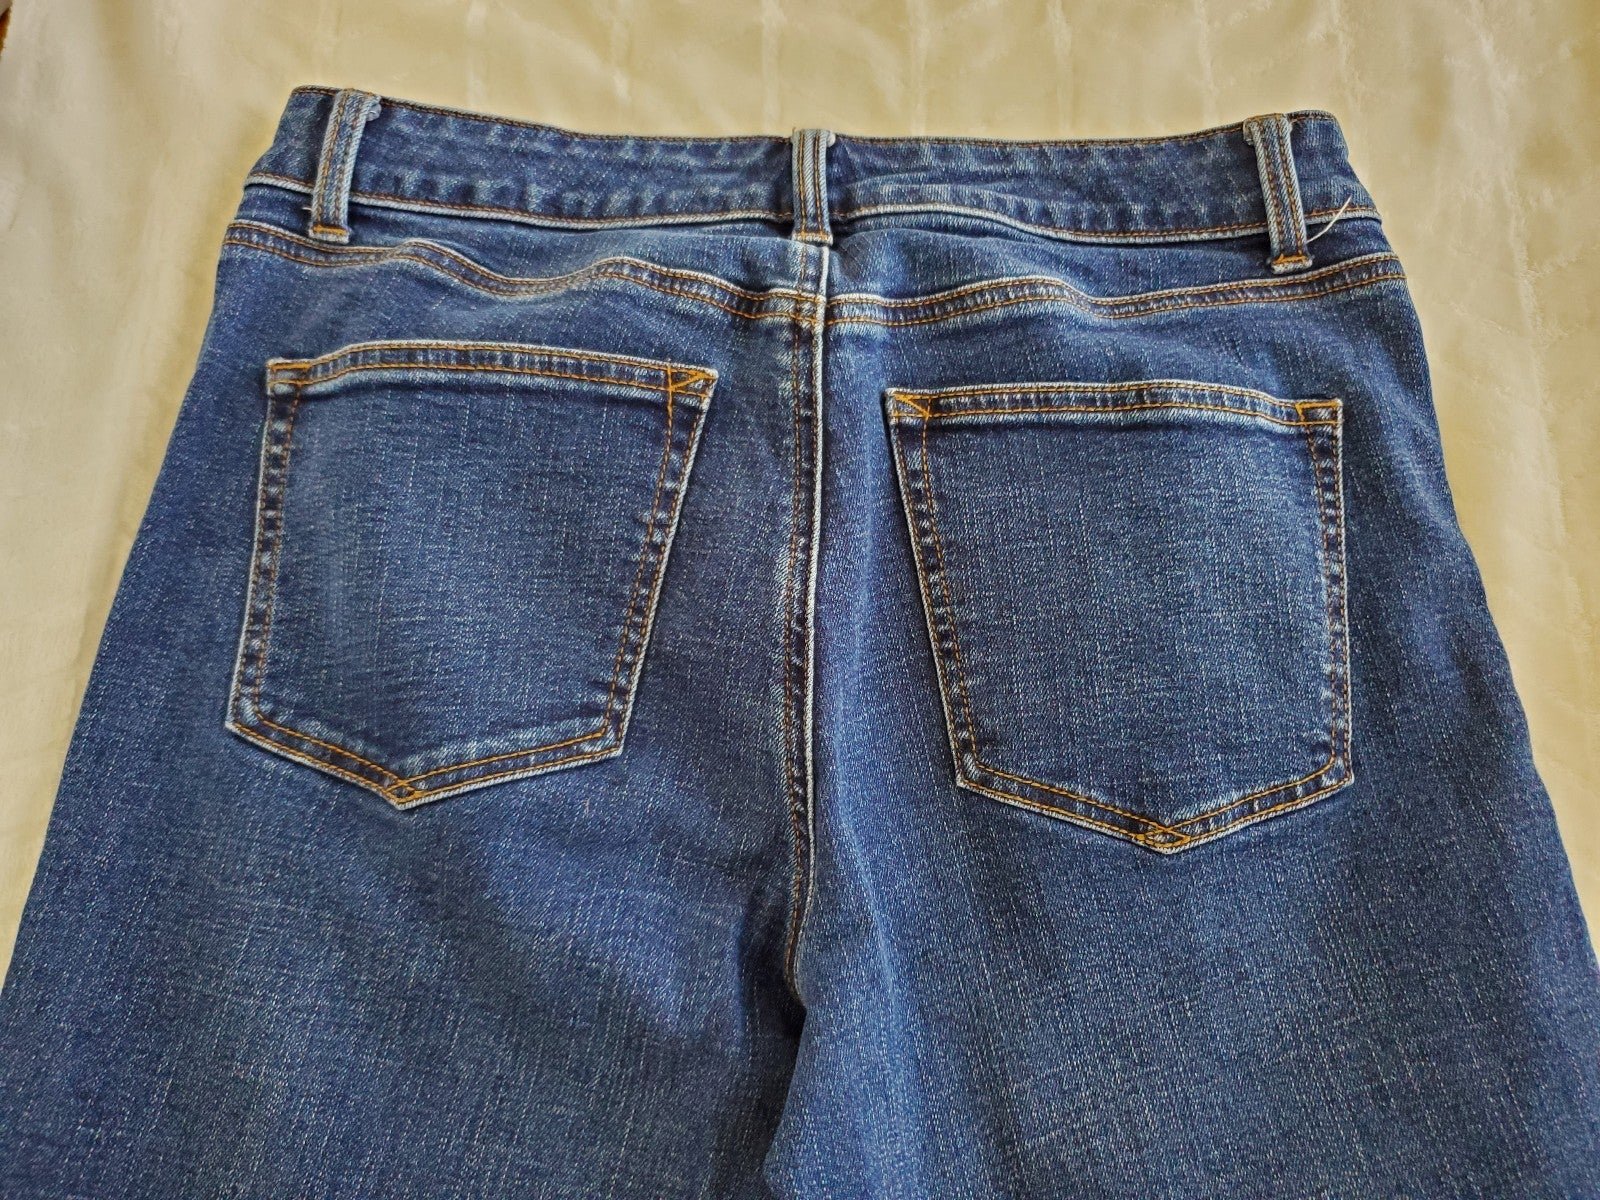 Exclusive Talbots 6 Petite Relaxed Jeans JgfIfzklb no tax